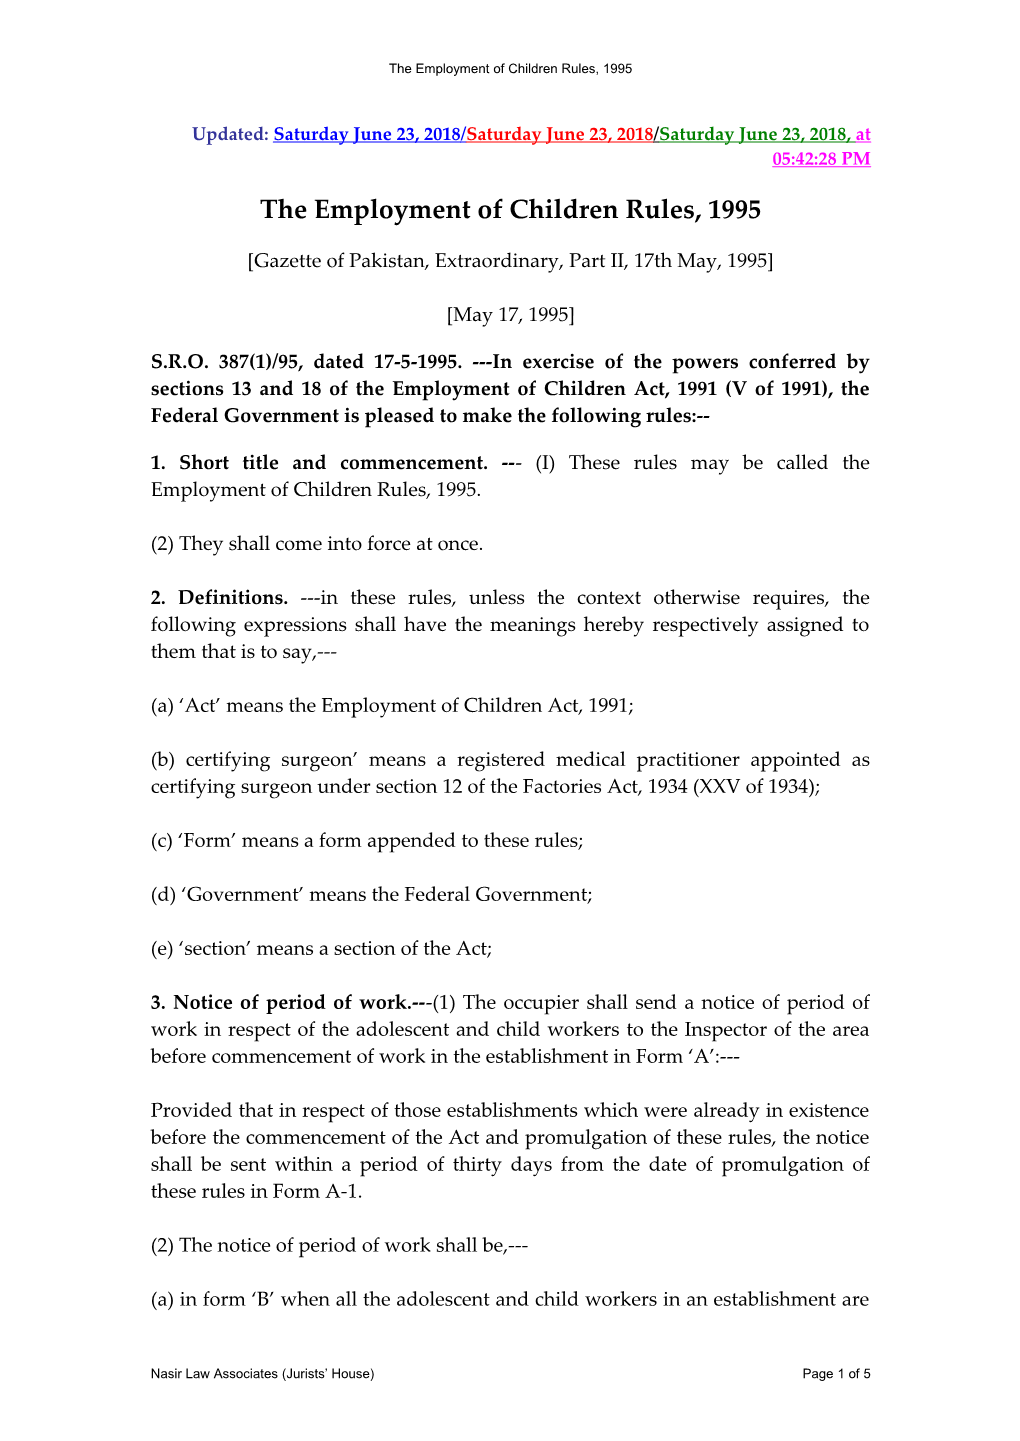 The Employment of Children Rules, 1995